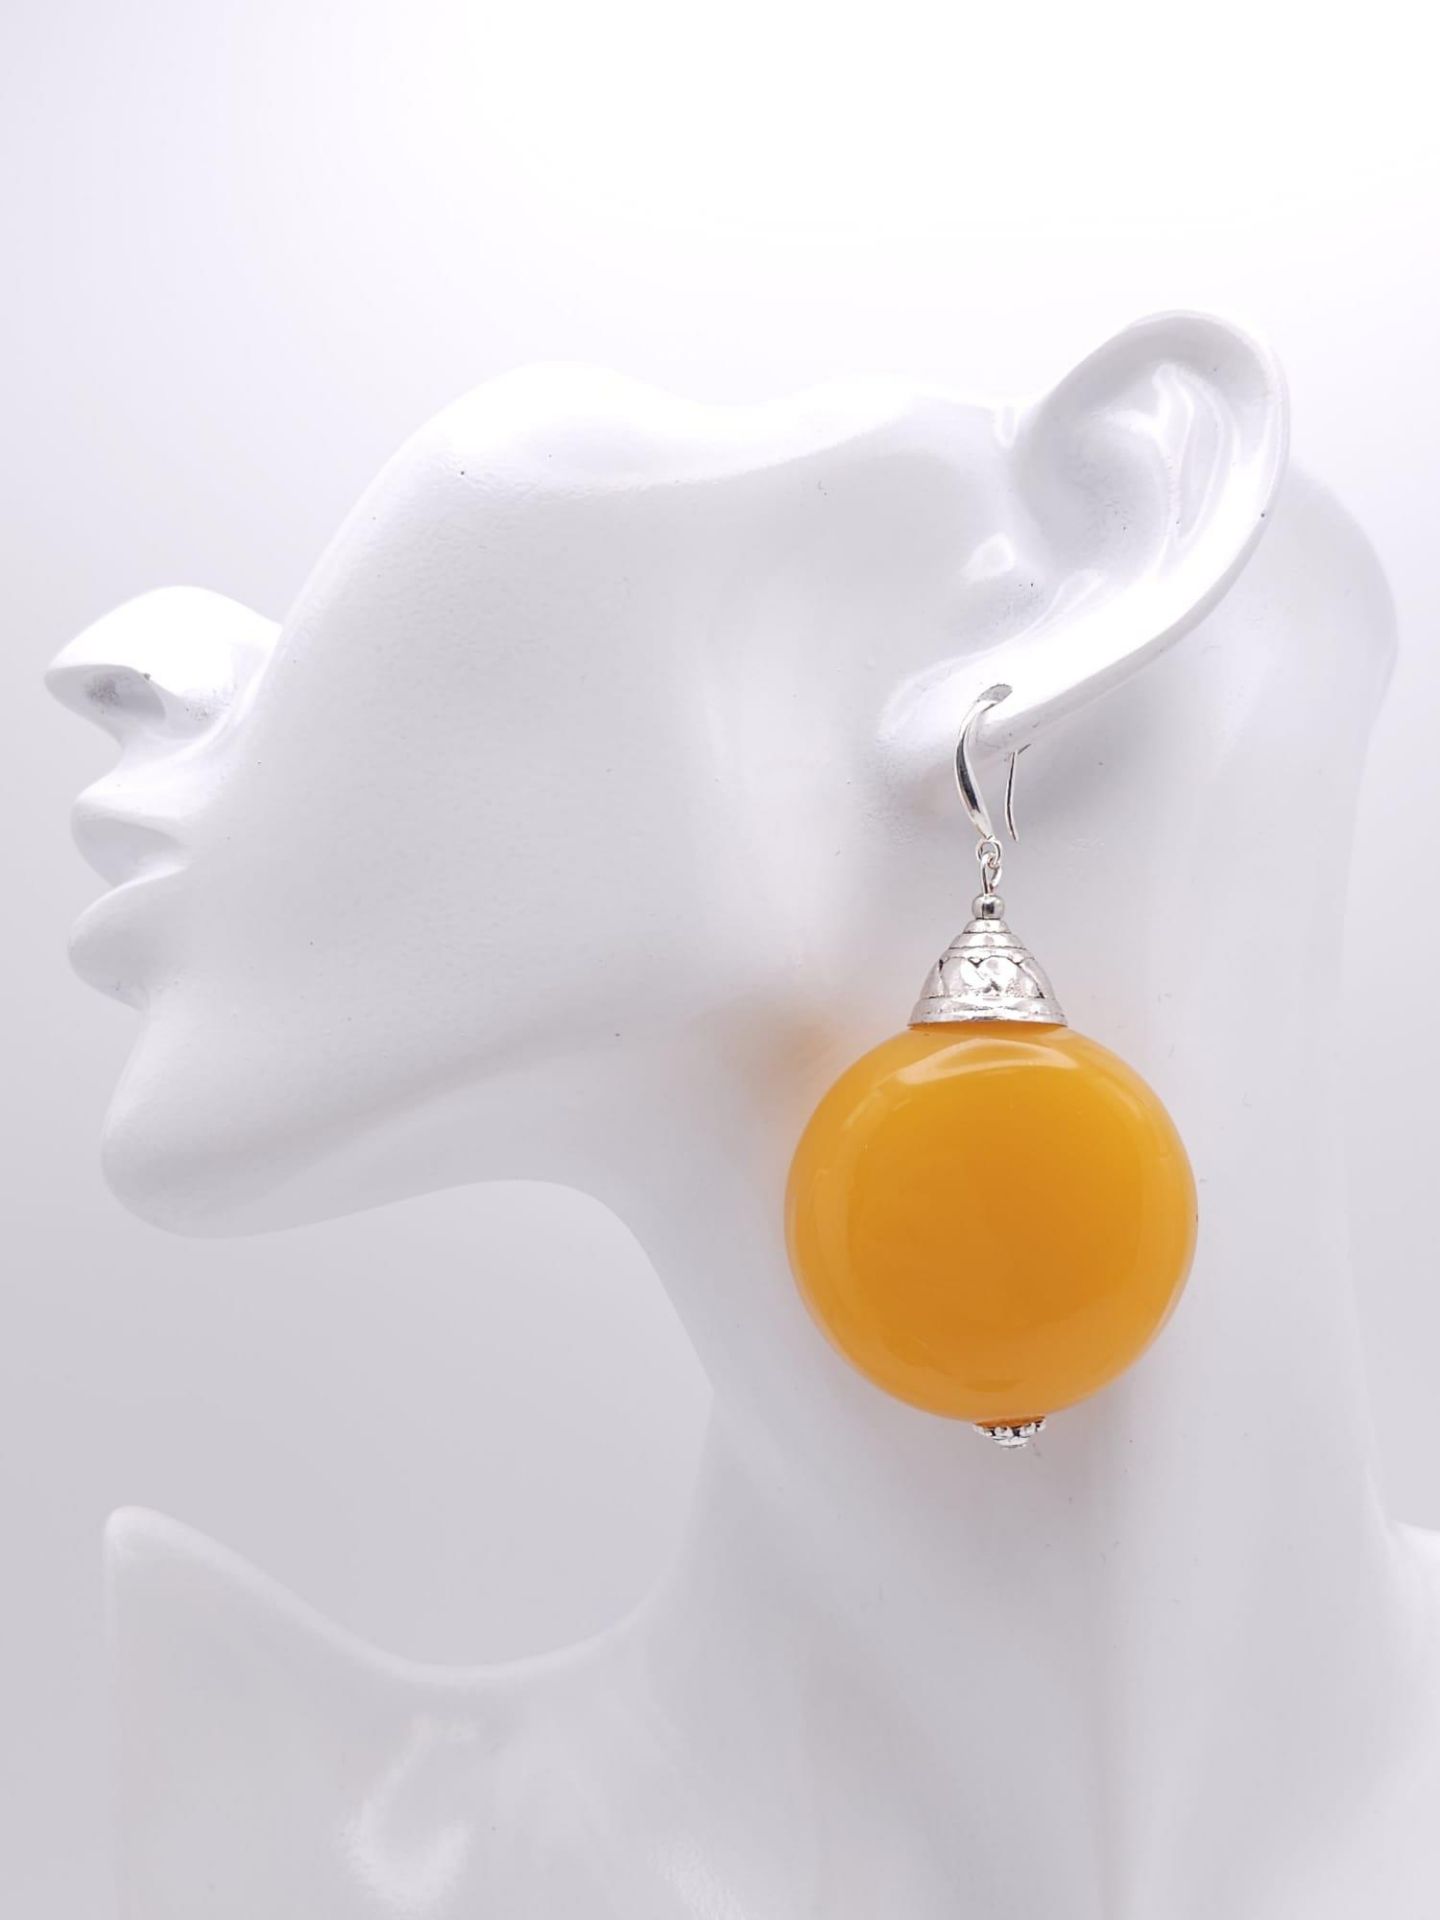 An Egg Yolk Amber Resin Necklace and Earrings Set. 46cm necklace. earrings - 5cm. - Image 13 of 13